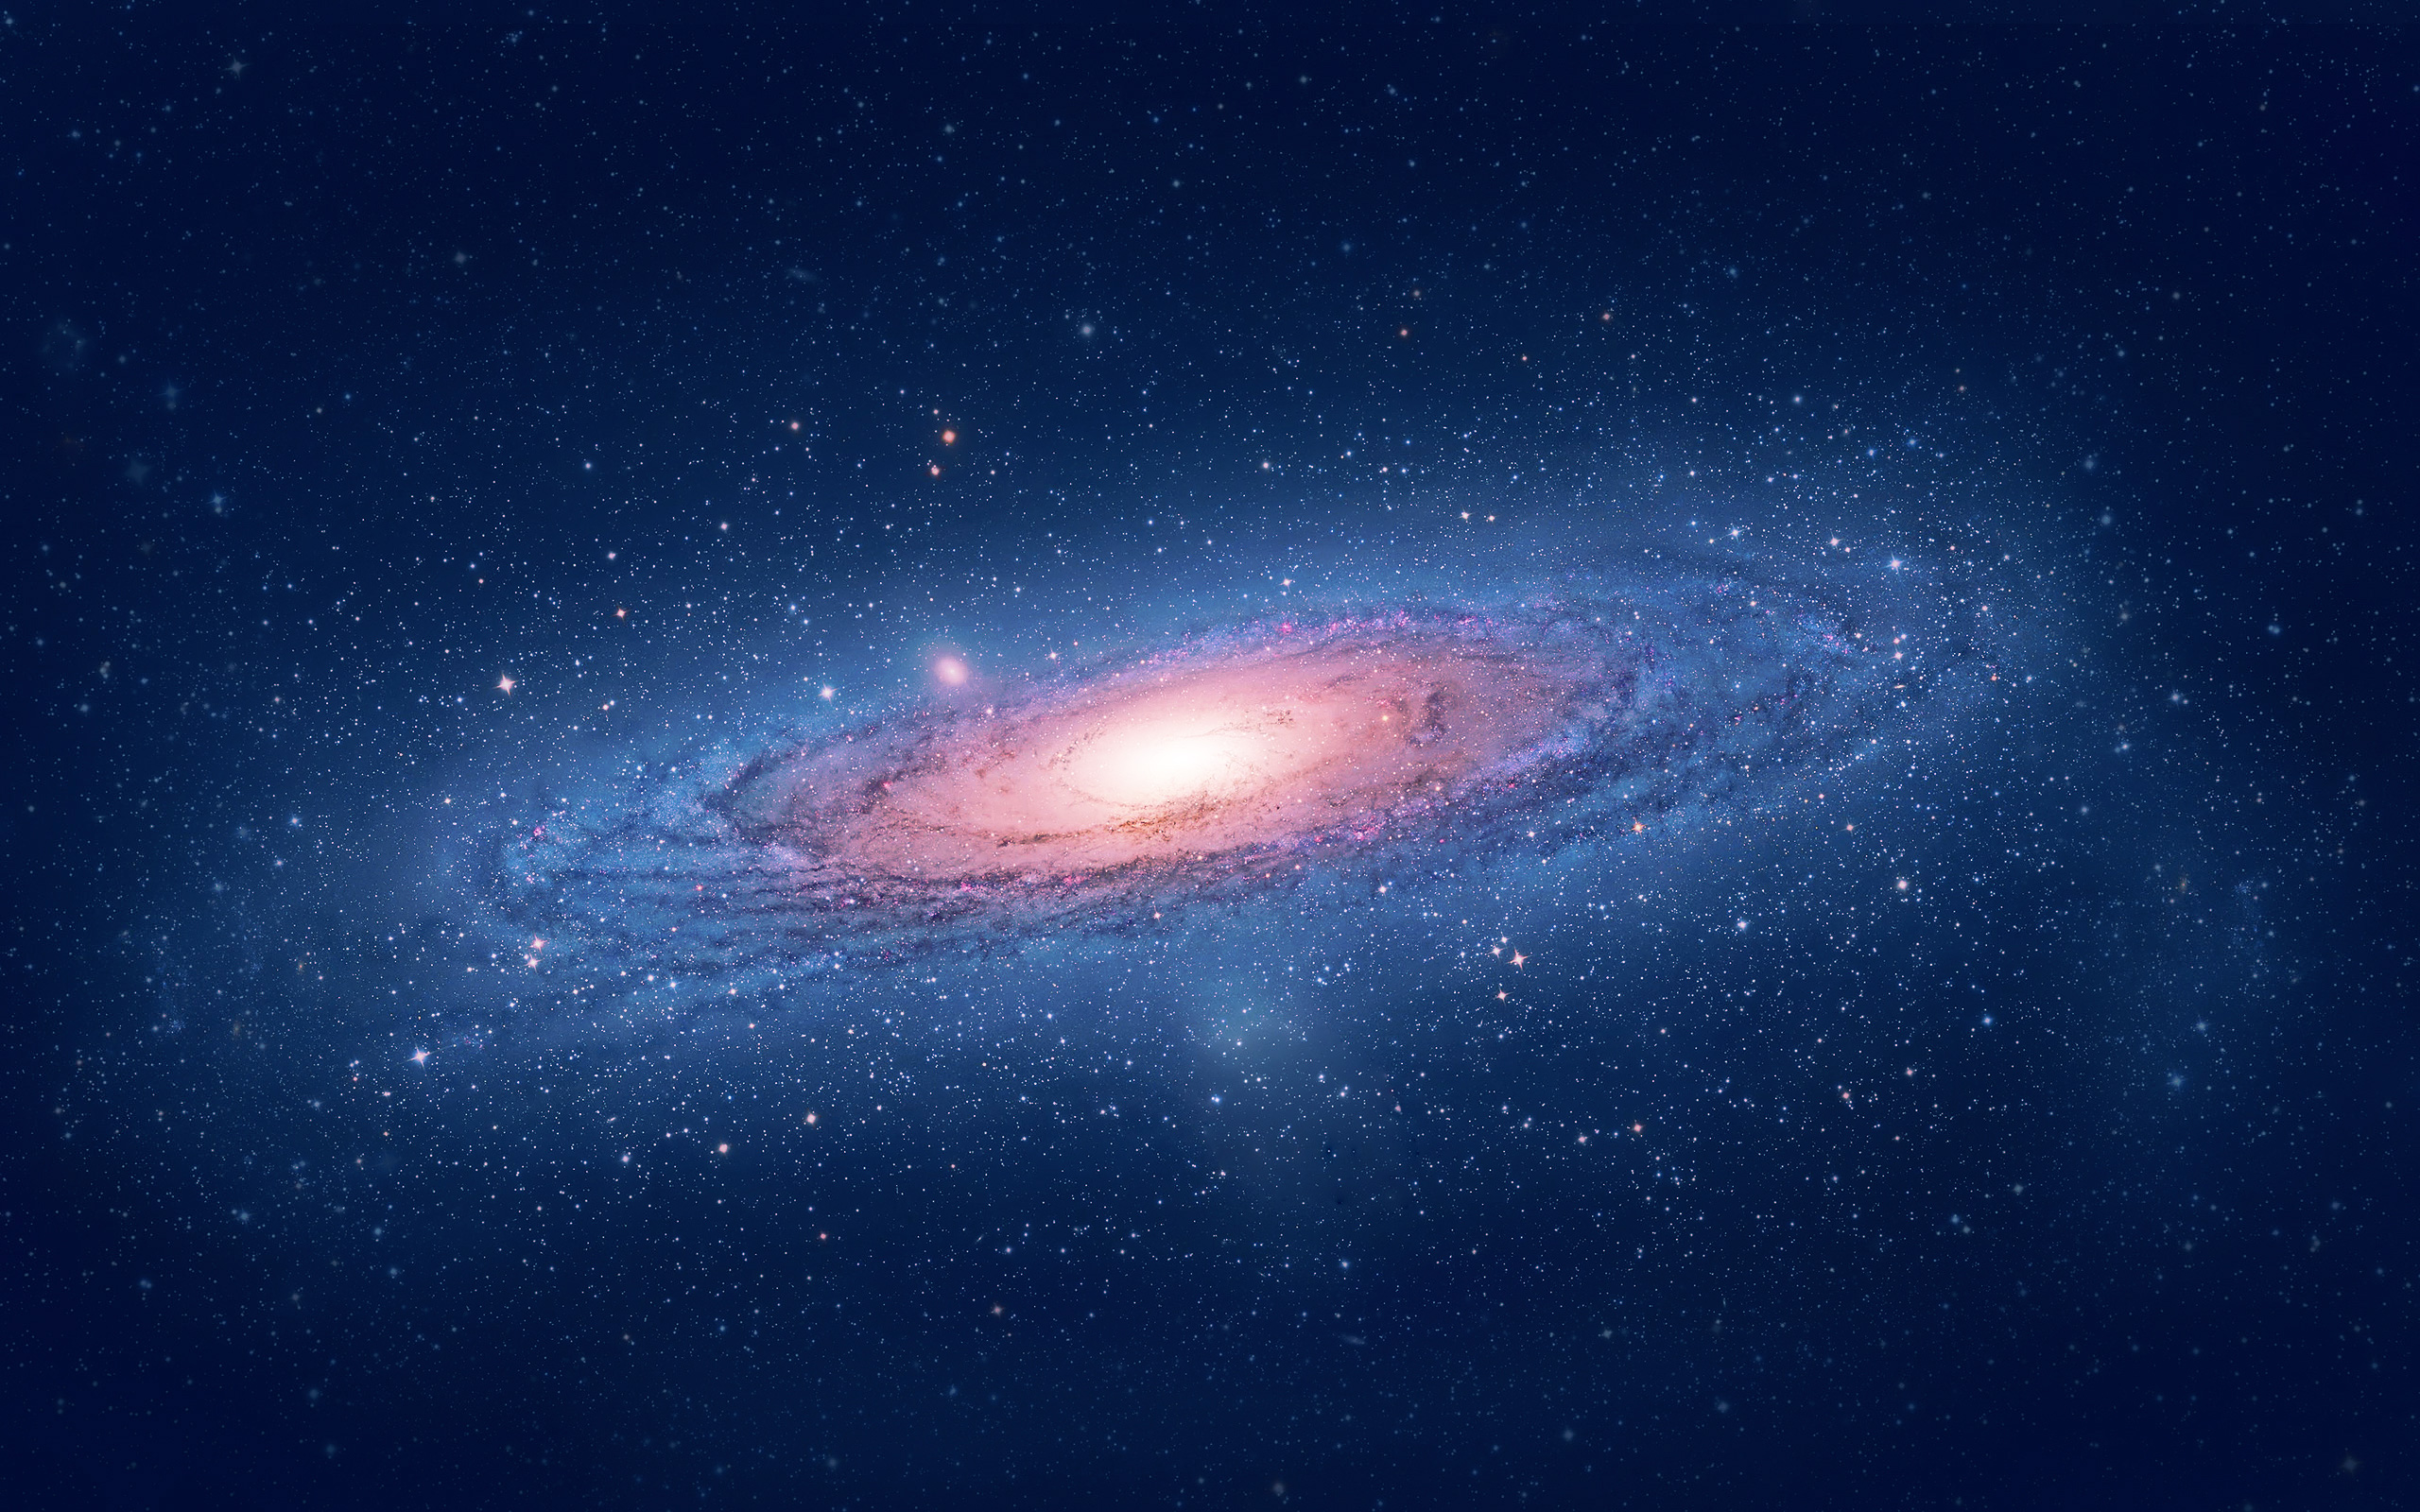  Hd Space Wallpapers For Mac Space Wallpaper 2560x1600